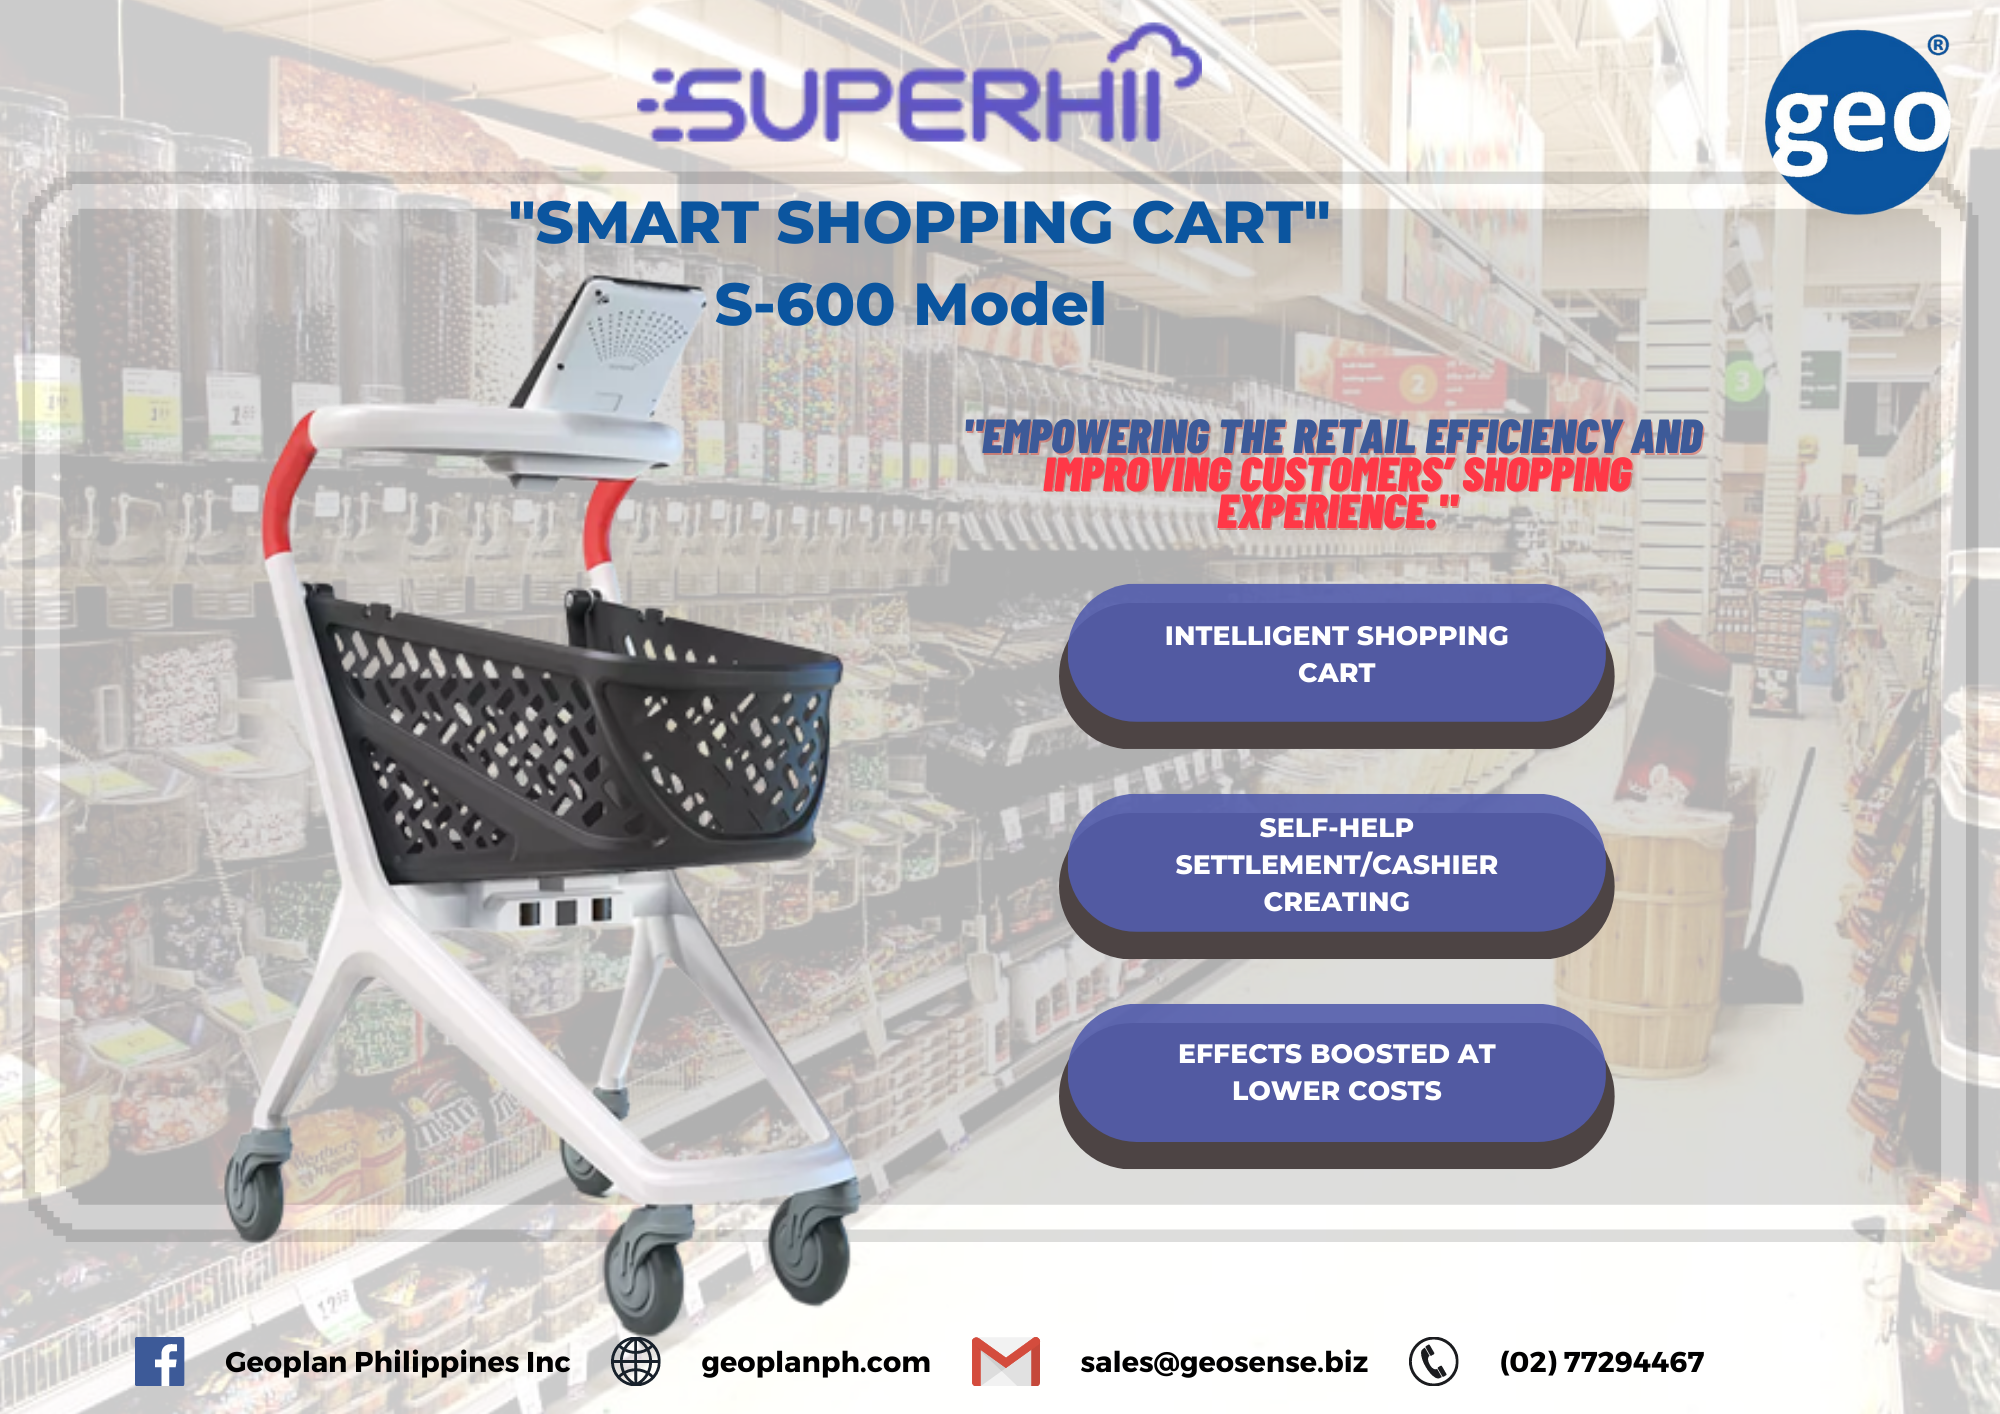 SuperHii: Instructions on how to utilize a smart shopping carts in detail